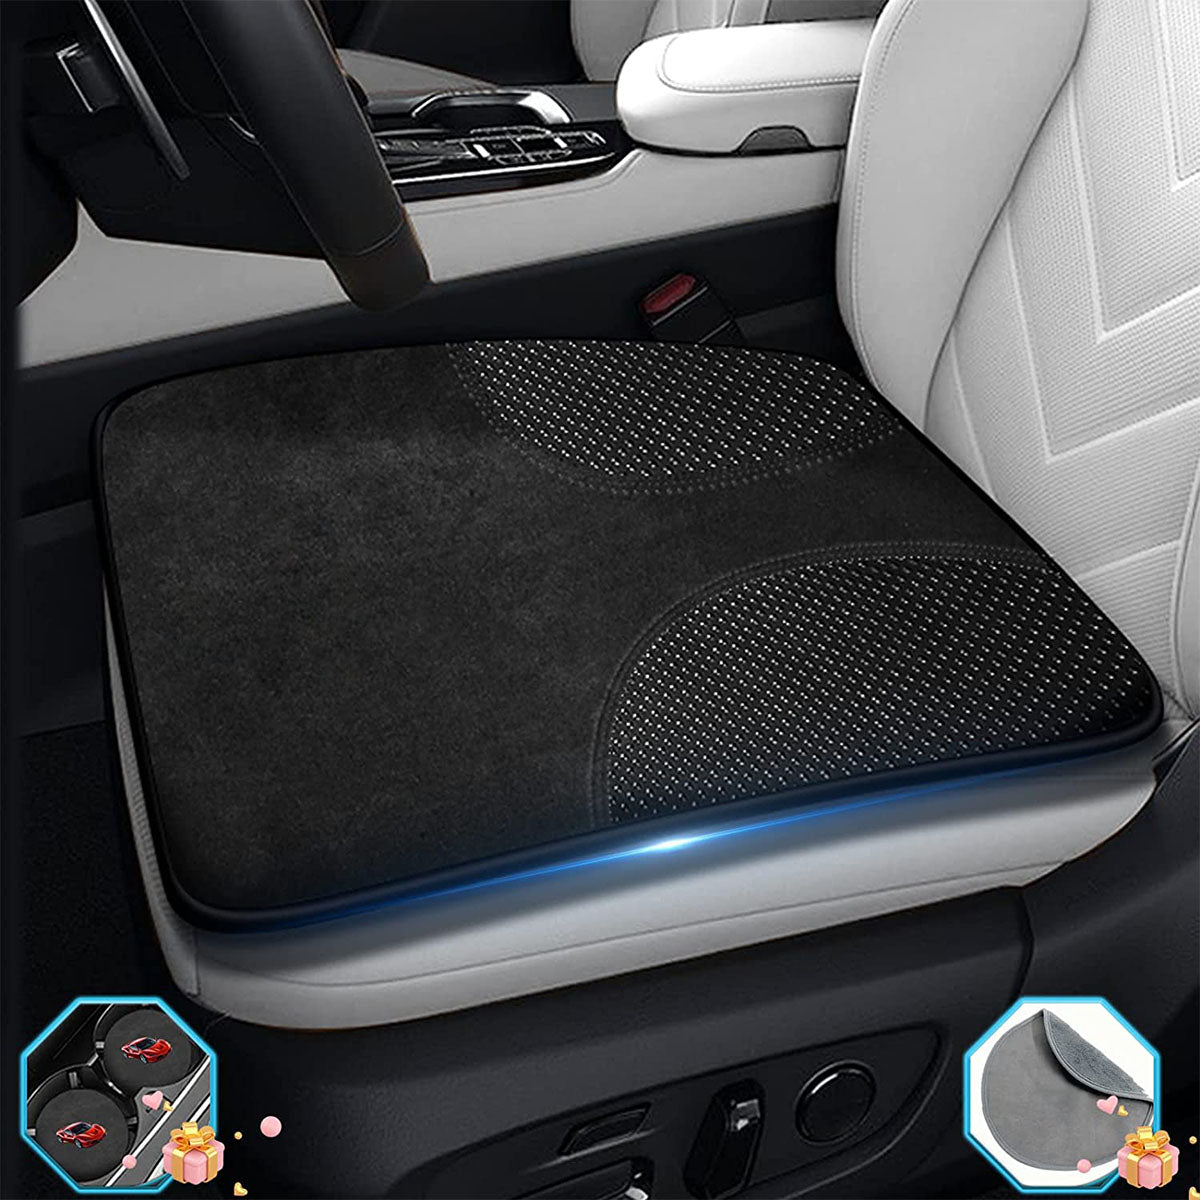 Car Seat Cushion, Custom Logo For Your Cars, Double Sided Seat Cushion, Breathable Suede + Ice Silk Car Seat Cushion, Comfort Seat Covers Cushion FJ19979